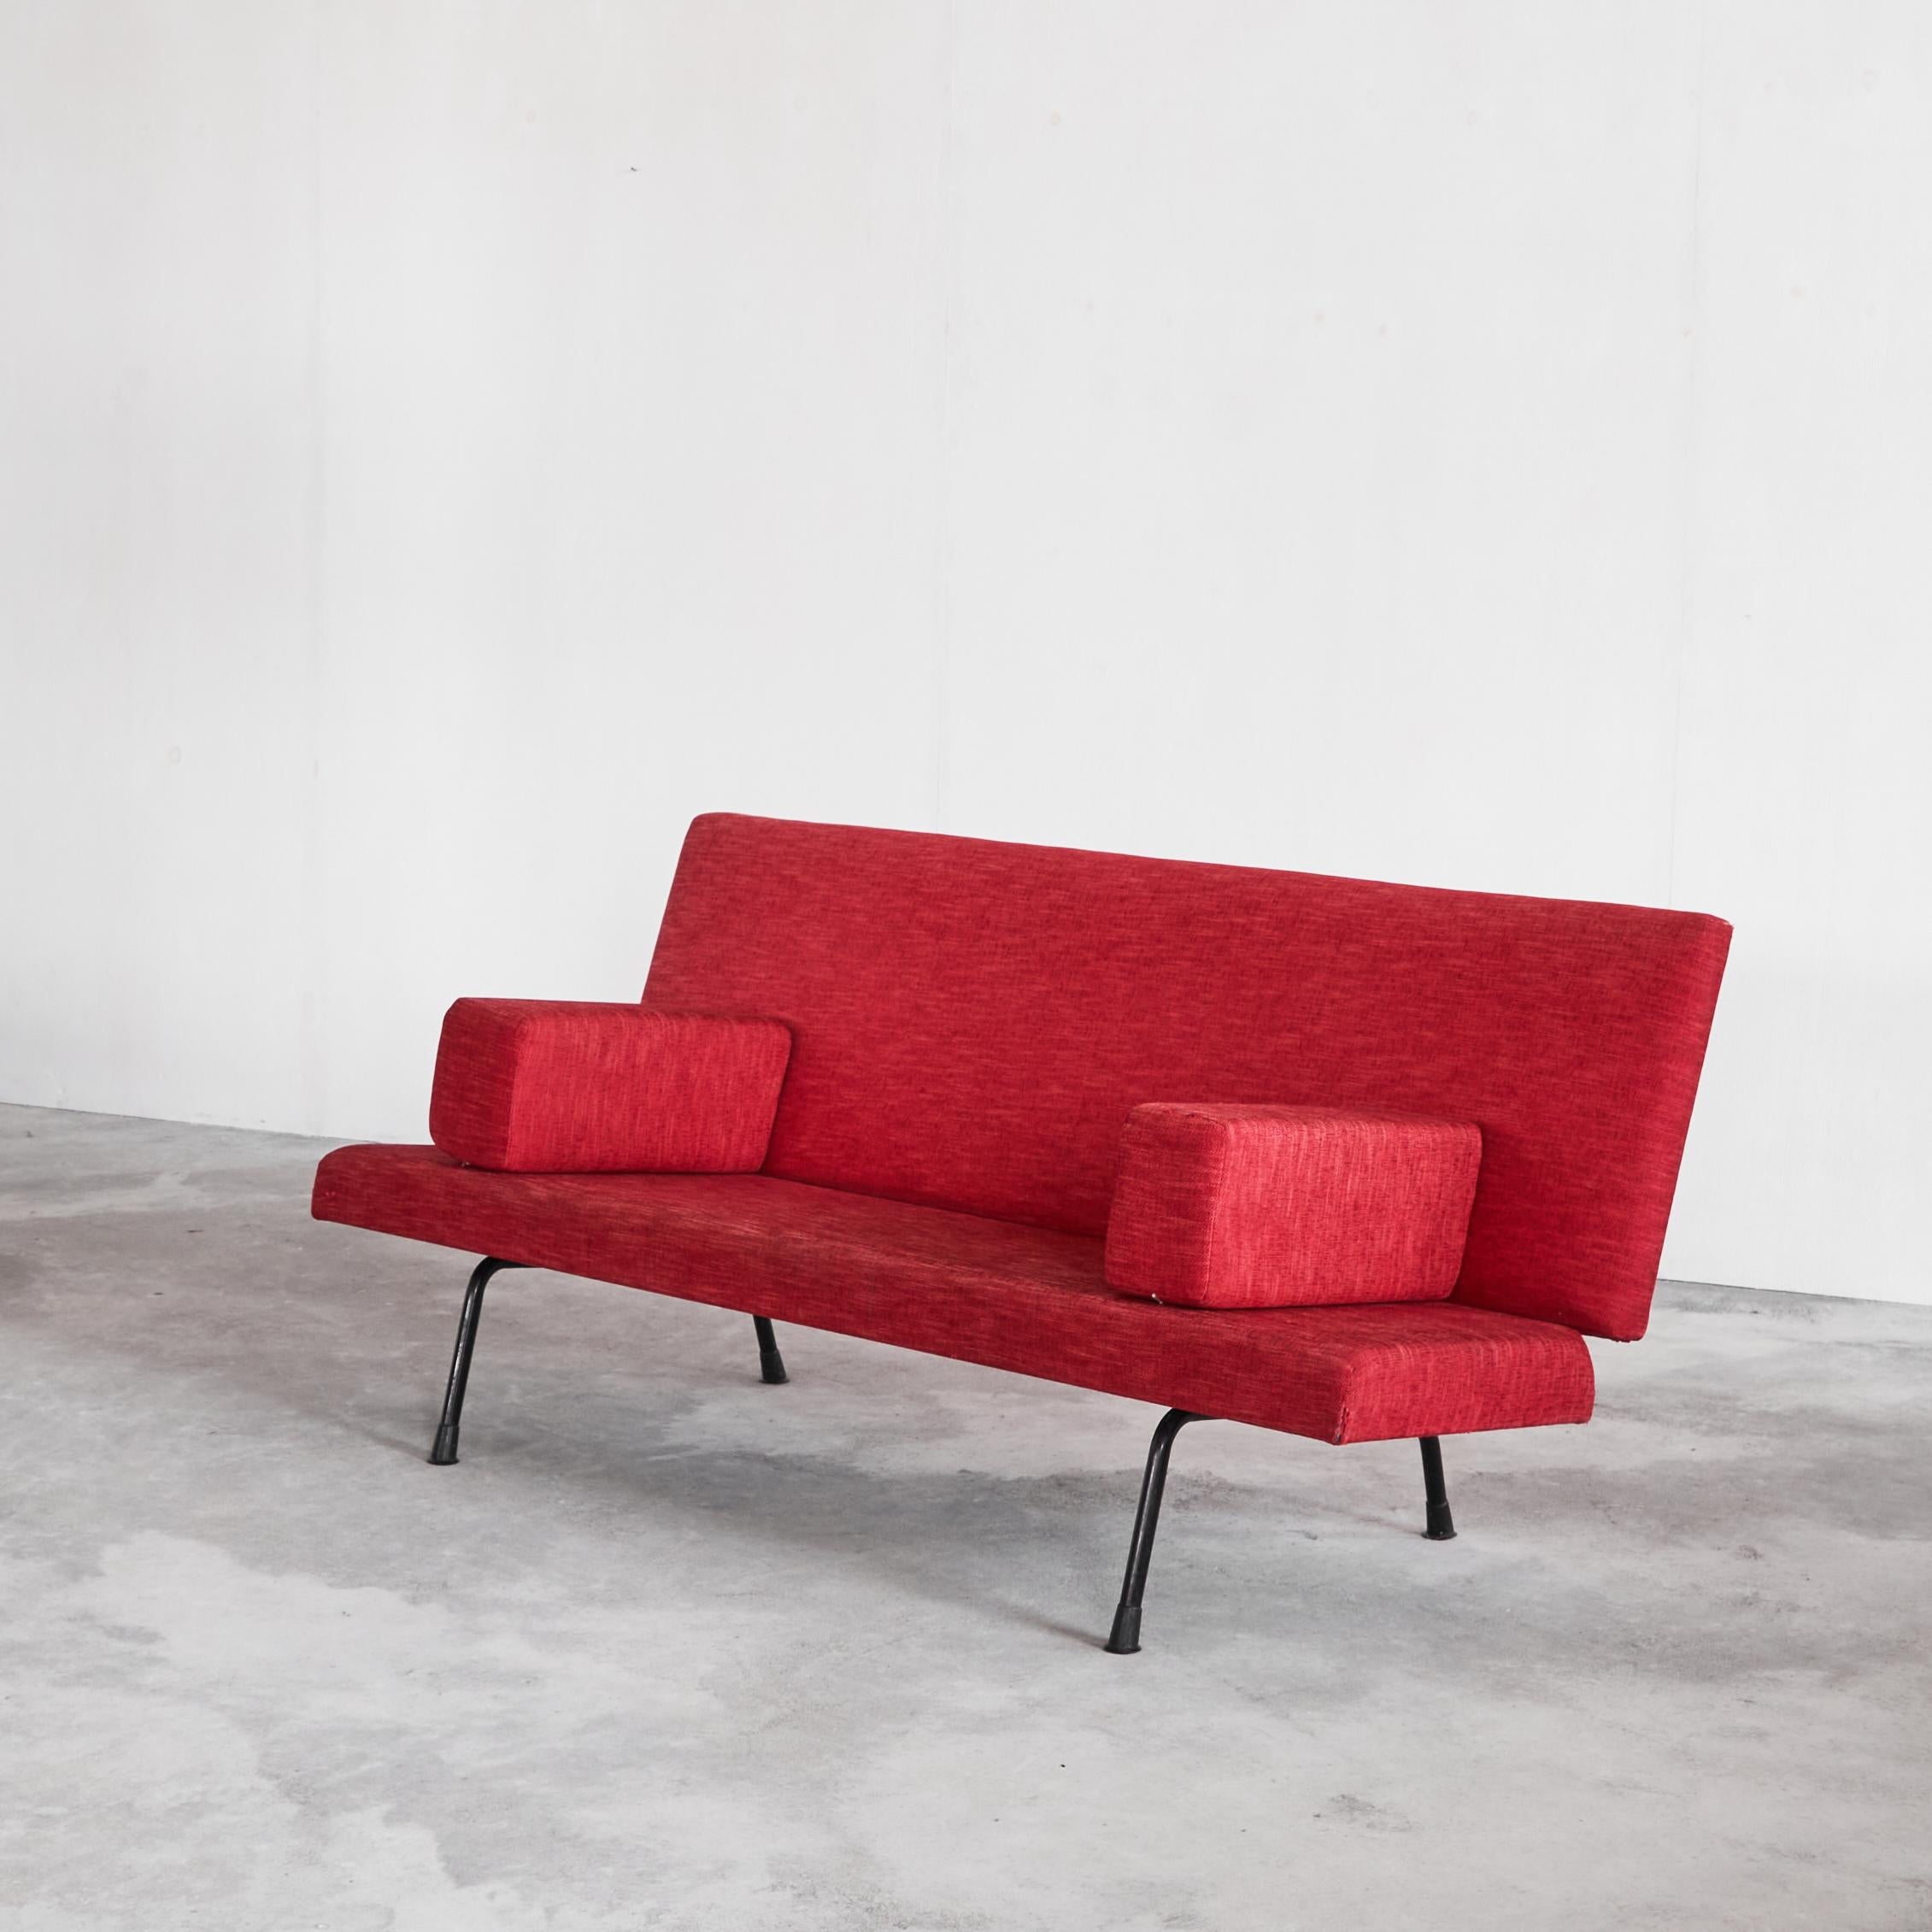 Wim Rietveld '447' Sofa in Red Fabric 1950s In Good Condition For Sale In Tilburg, NL